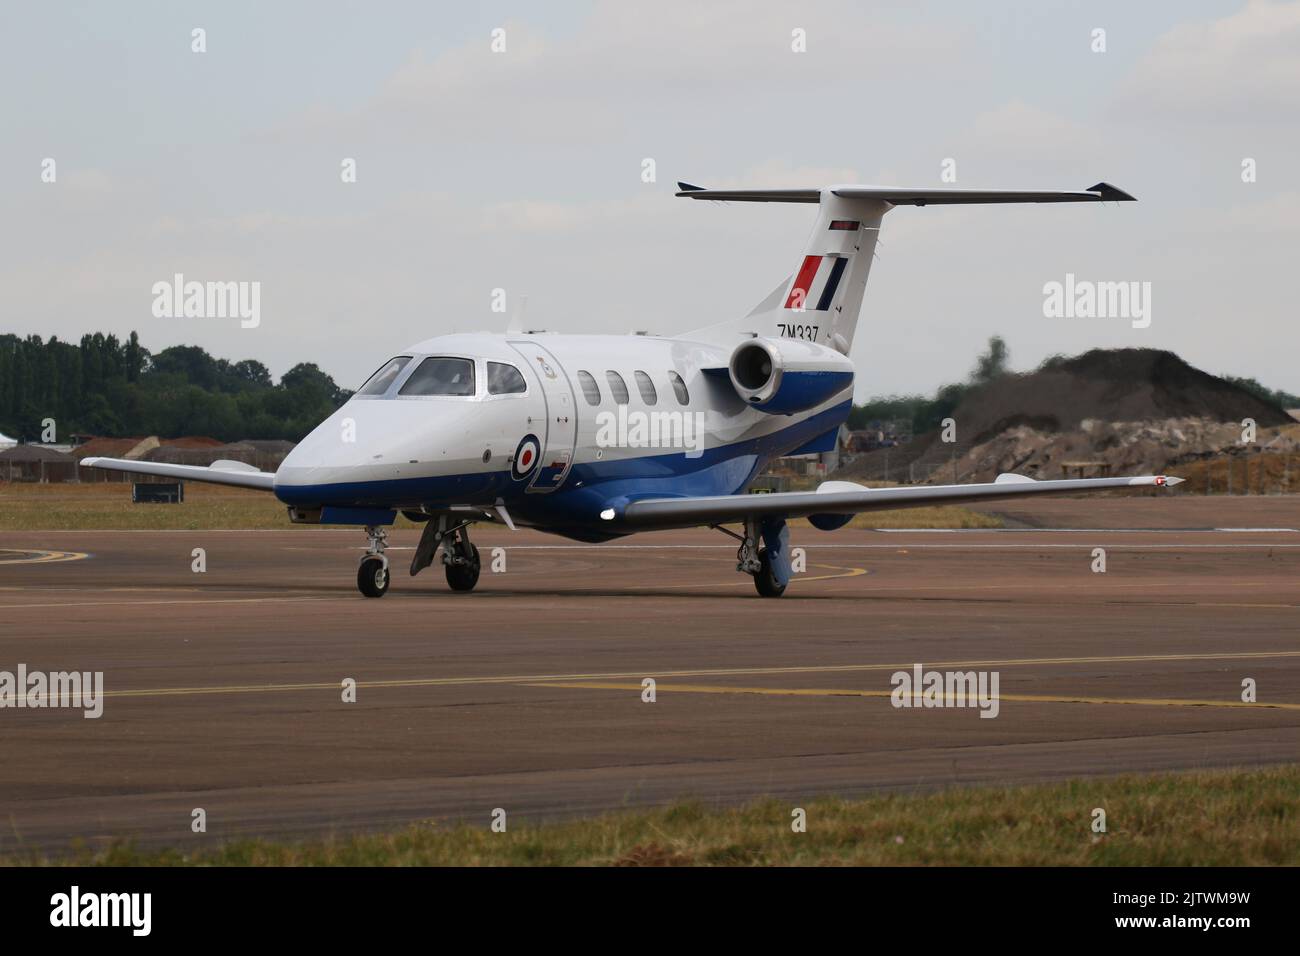 ZM335, an Embraer Phenom T.1 operated by No.45 Squadron of the Royal Air Force, arriving at RAF Fairford in Gloucestershire, England, to participate in the Royal International Air Tattoo 2022 (RIAT 2022). Stock Photo